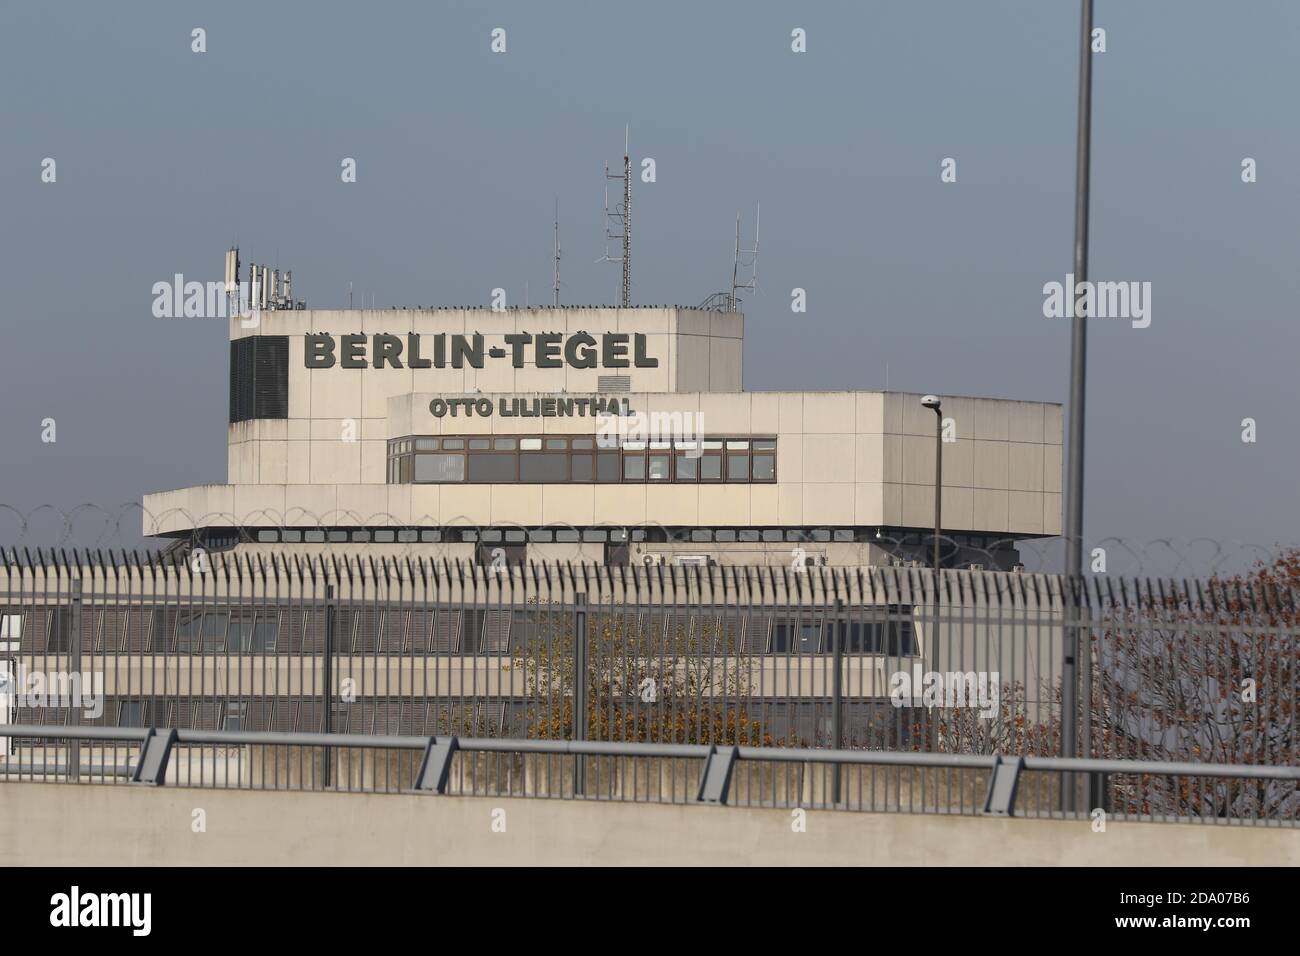 11/08/2020, Berlin,  Germany,The  Berlin Tegel Airport, or TXL for short, will close on November 8th. 60 years after Air France's first scheduled flight, on November 8th an aircraft of the French airline will take off from the airport in northeast Berlin for the very last time and say goodbye. Last Air France departure (AF1235 to Paris CDG, 3:00 p.m.). Stock Photo